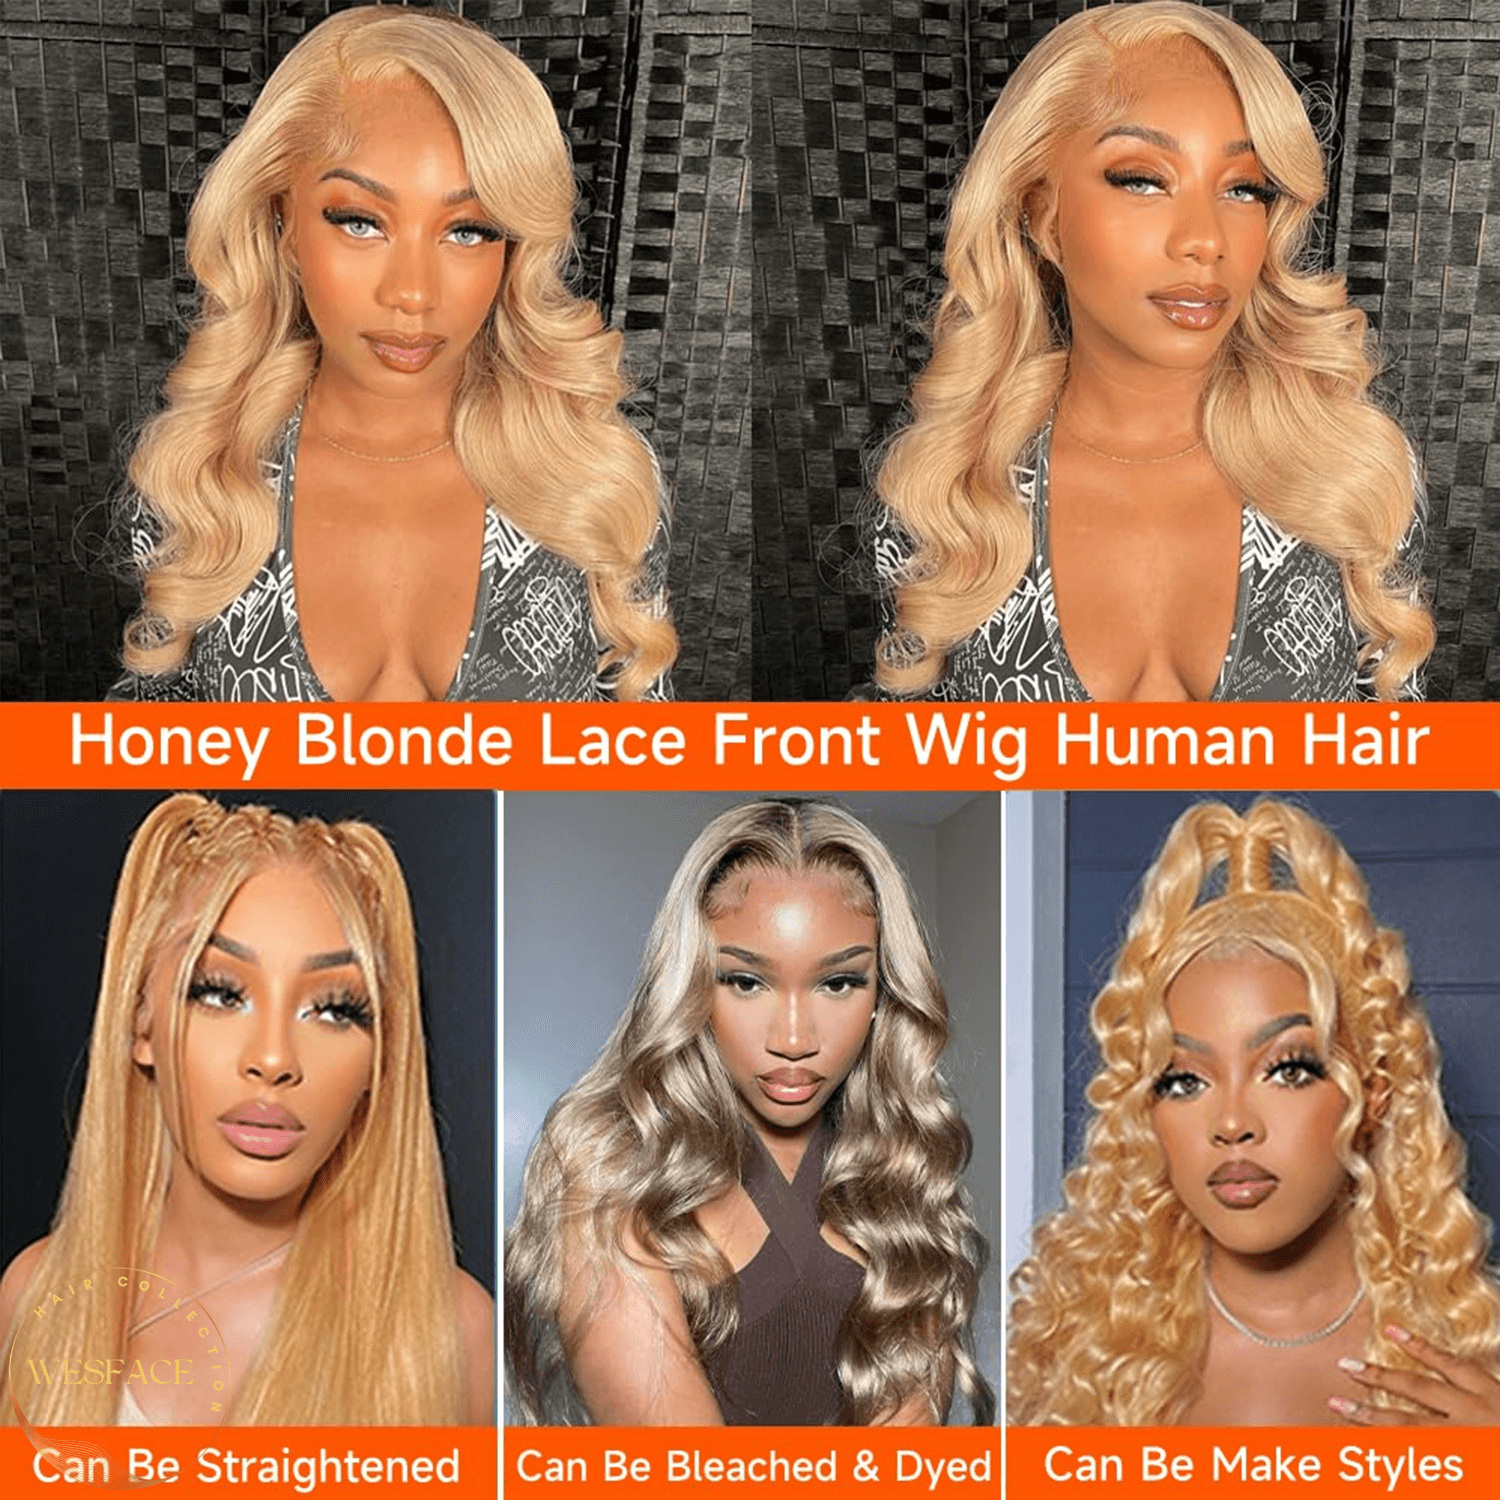 Wesface Honey Blonde Lace Front Wig Human Hair Body Wave 13x4 Lace Frontal Human Hair Wigs Pre Plucked with Baby Hair 180% Density Glueless Wigs 27